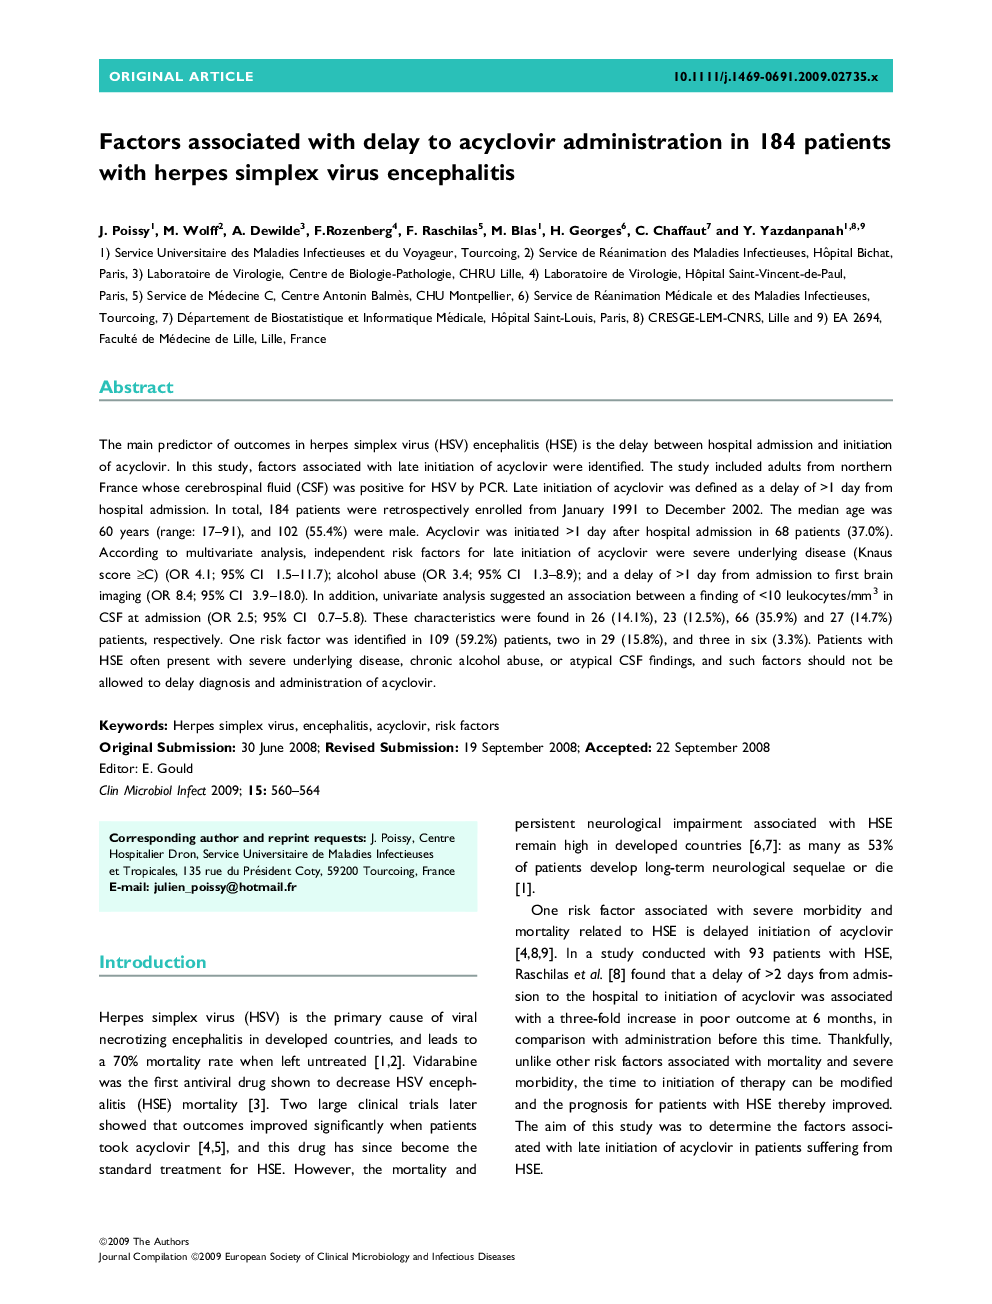 Factors associated with delay to acyclovir administration in 184 patients with herpes simplex virus encephalitis 